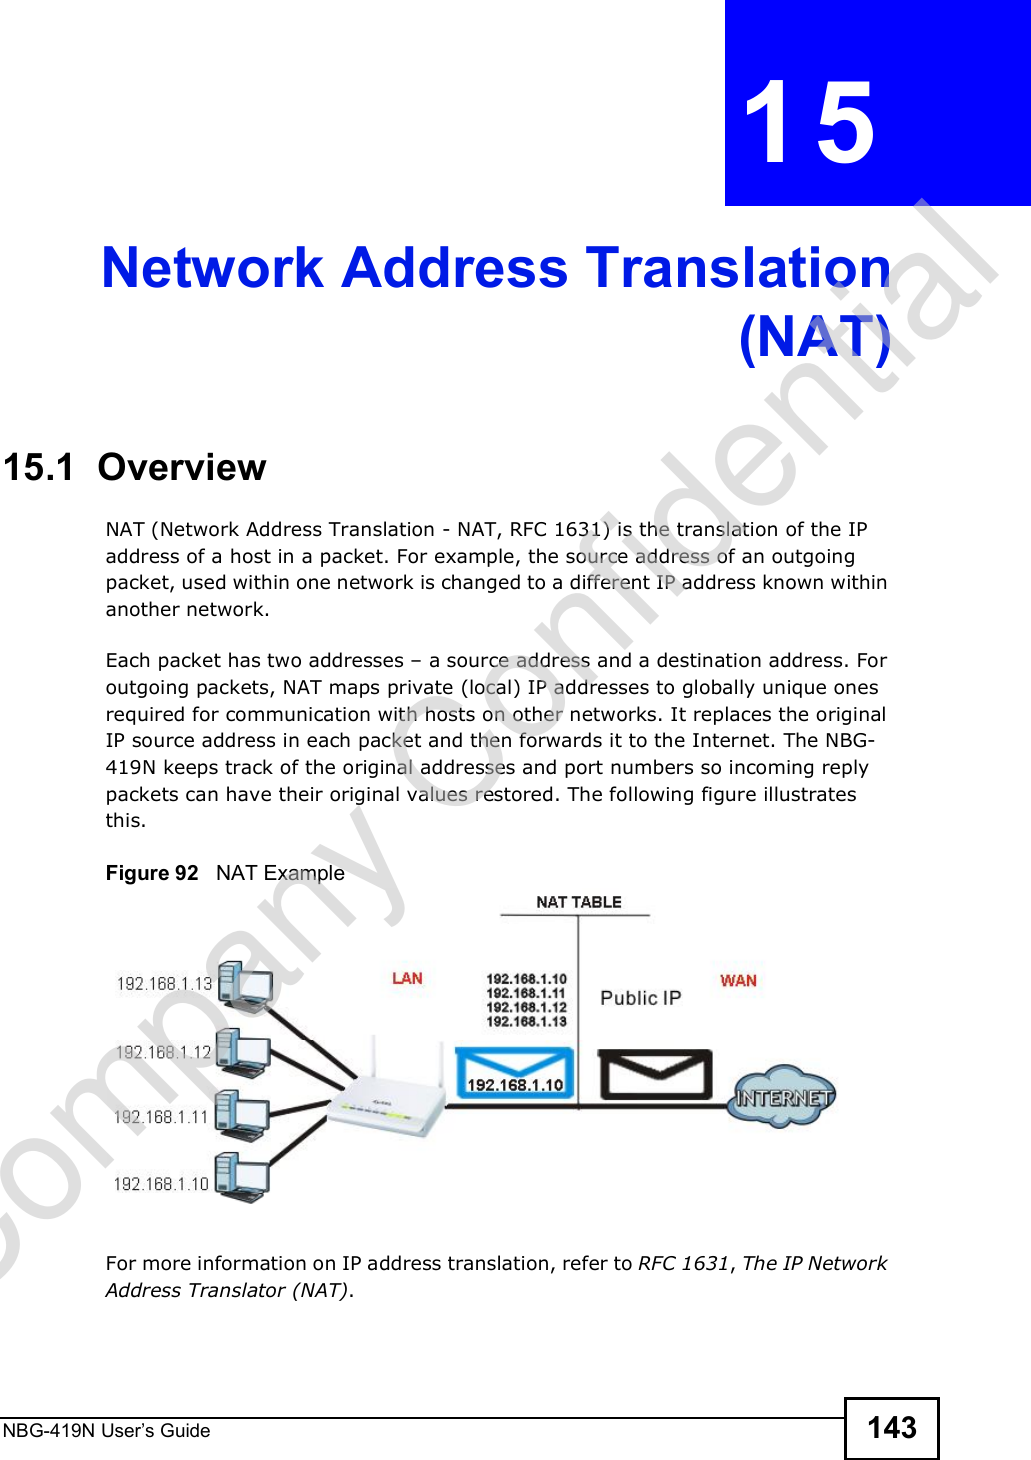 NBG-419N User s Guide 143CHAPTER  15 Network Address Translation(NAT)15.1  Overview   NAT (Network Address Translation - NAT, RFC 1631) is the translation of the IP address of a host in a packet. For example, the source address of an outgoing packet, used within one network is changed to a different IP address known within another network.Each packet has two addresses $ a source address and a destination address. For outgoing packets, NAT maps private (local) IP addresses to globally unique ones required for communication with hosts on other networks. It replaces the original IP source address in each packet and then forwards it to the Internet. The NBG-419N keeps track of the original addresses and port numbers so incoming reply packets can have their original values restored. The following figure illustrates this.Figure 92   NAT ExampleFor more information on IP address translation, refer to RFC 1631, The IP Network Address Translator (NAT).Company Confidential